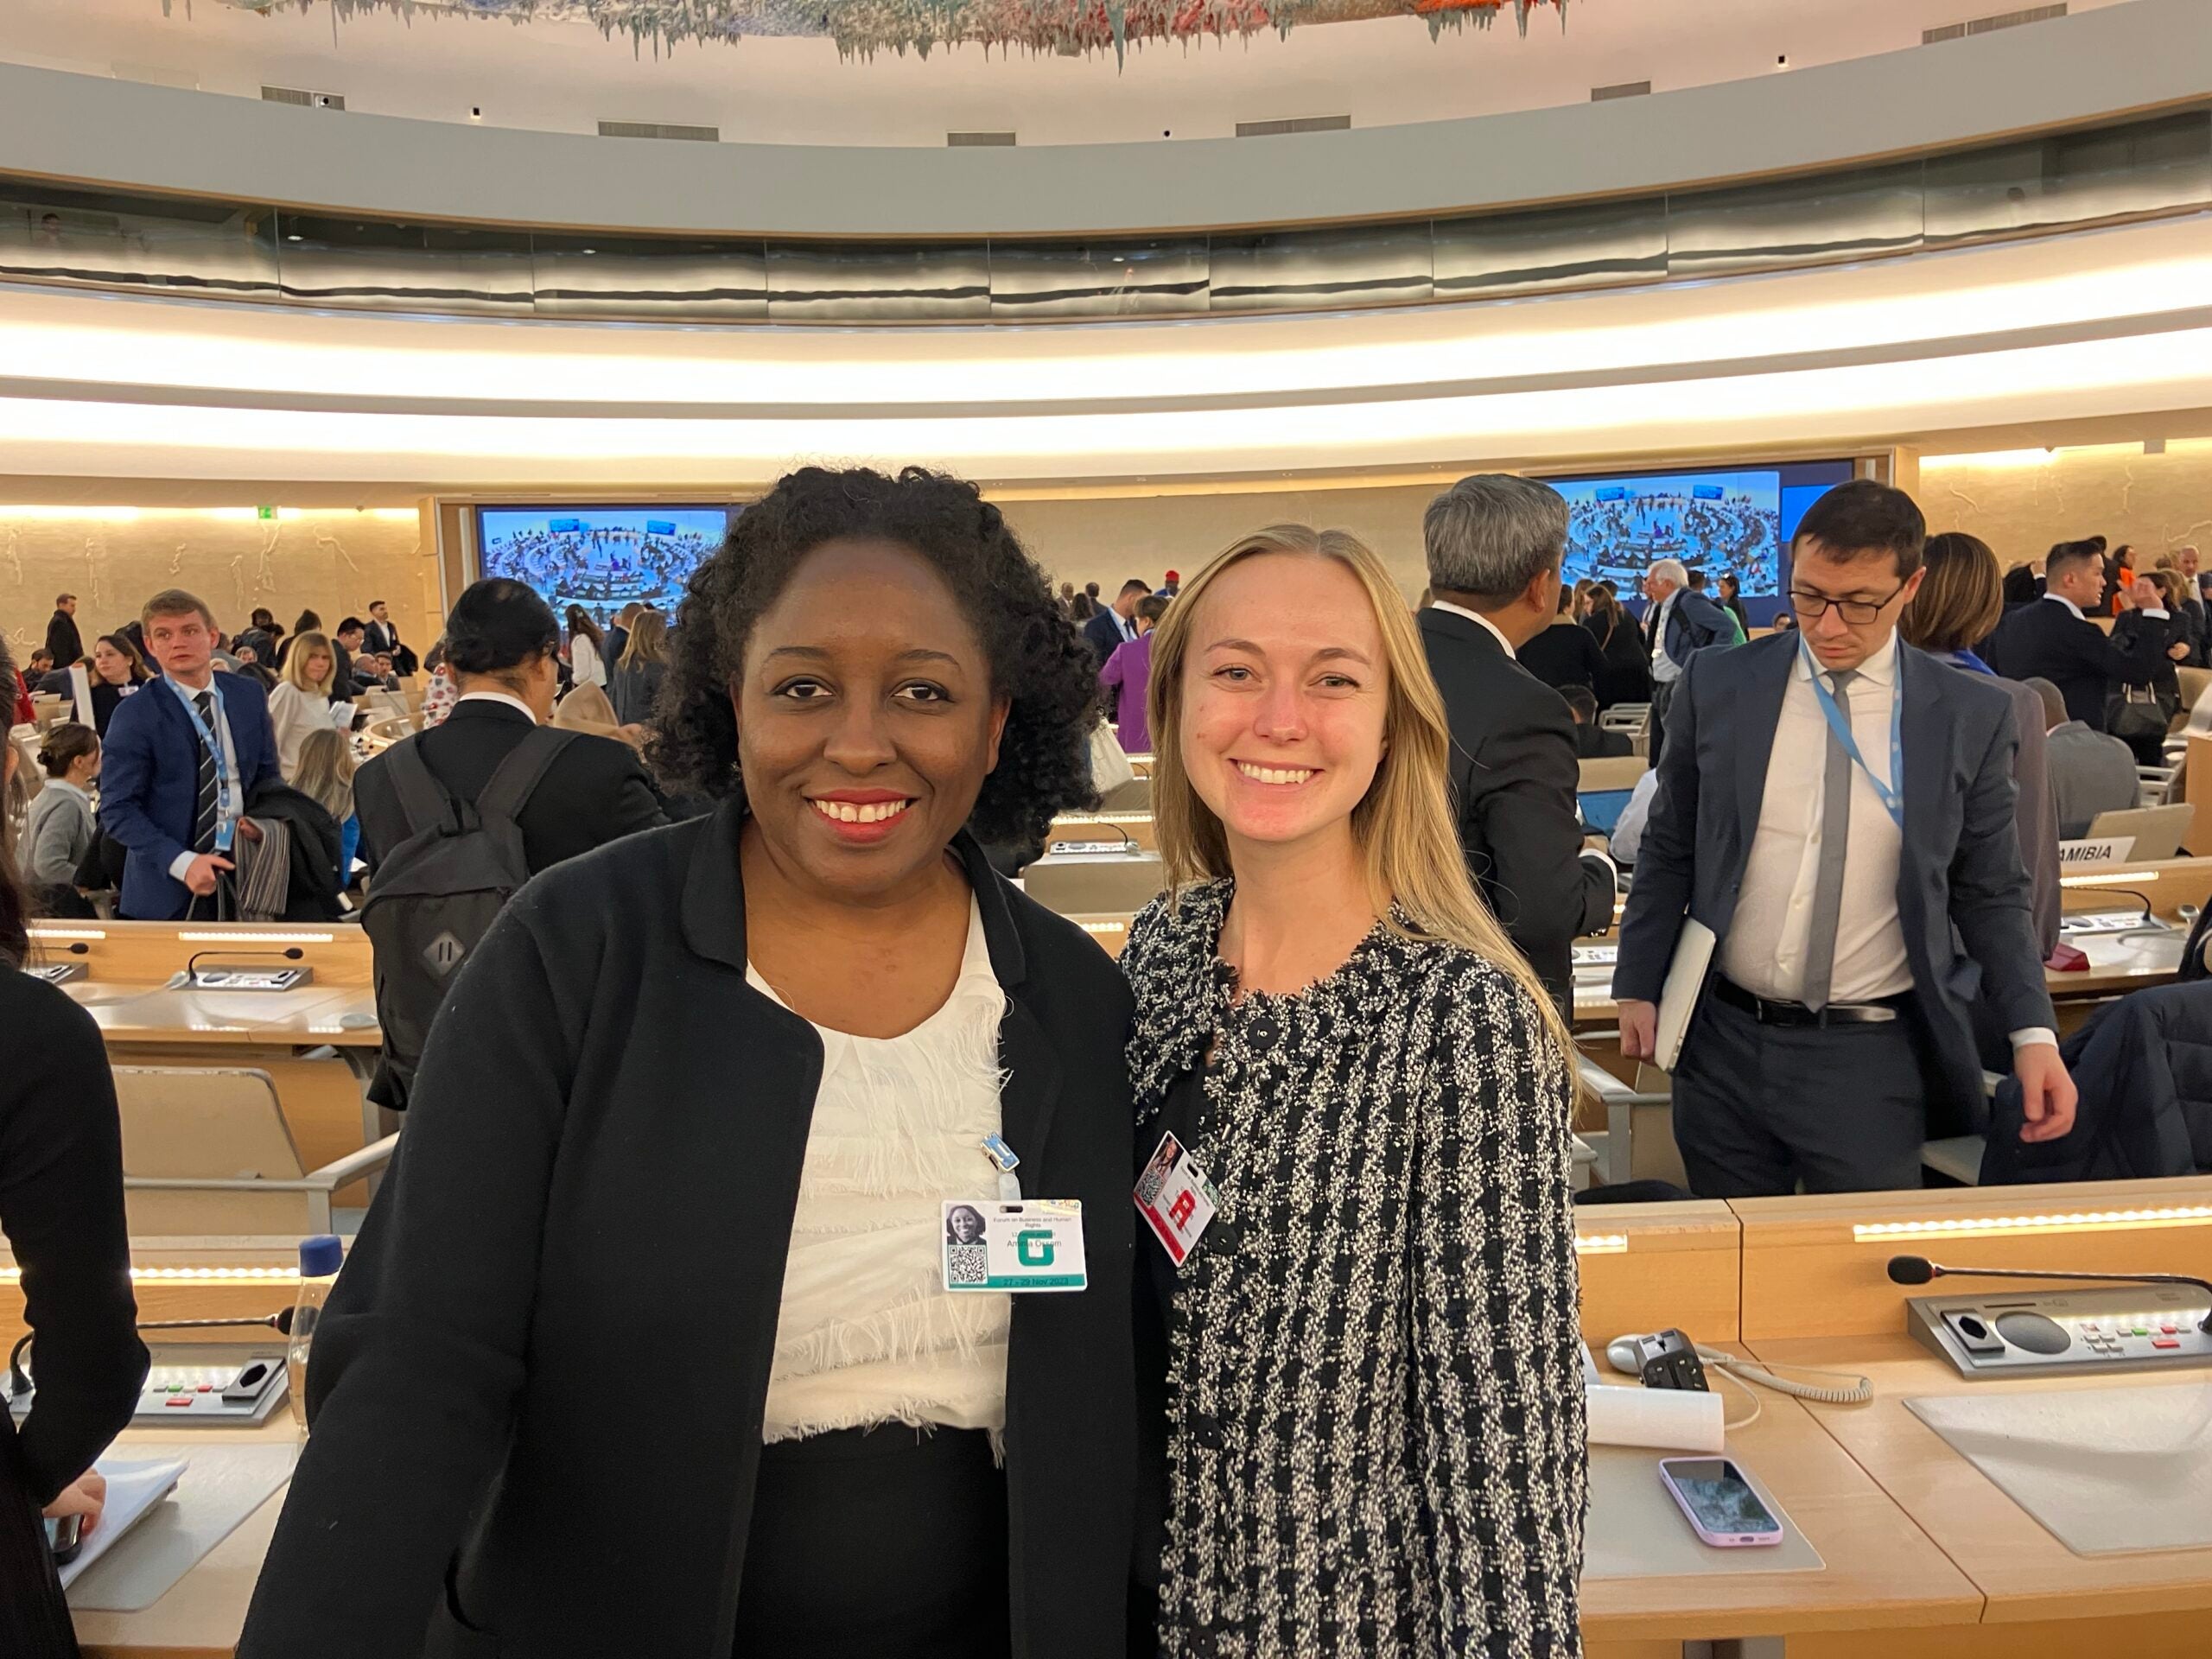 two women smile in a crowded room a the UN